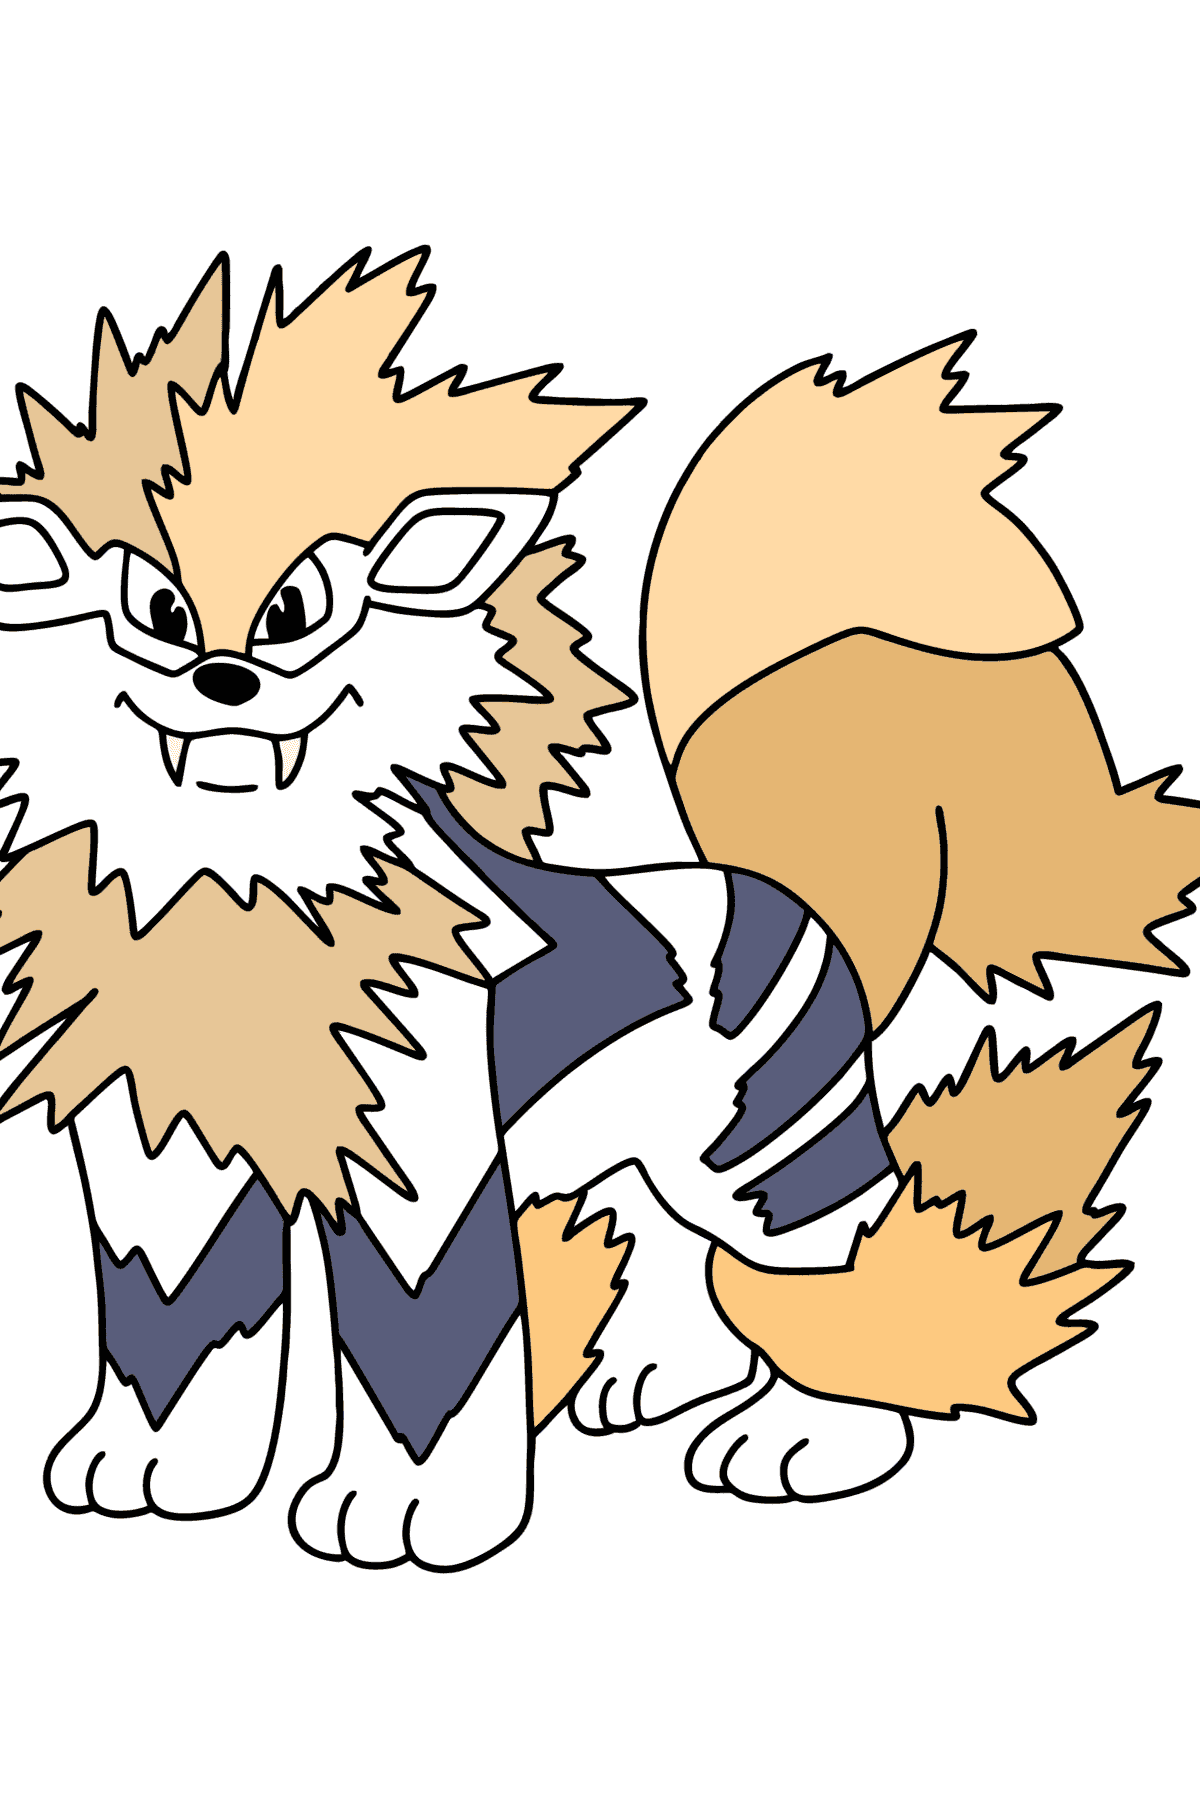 Pokémon Go Arcanine coloring page - Coloring Pages for Kids